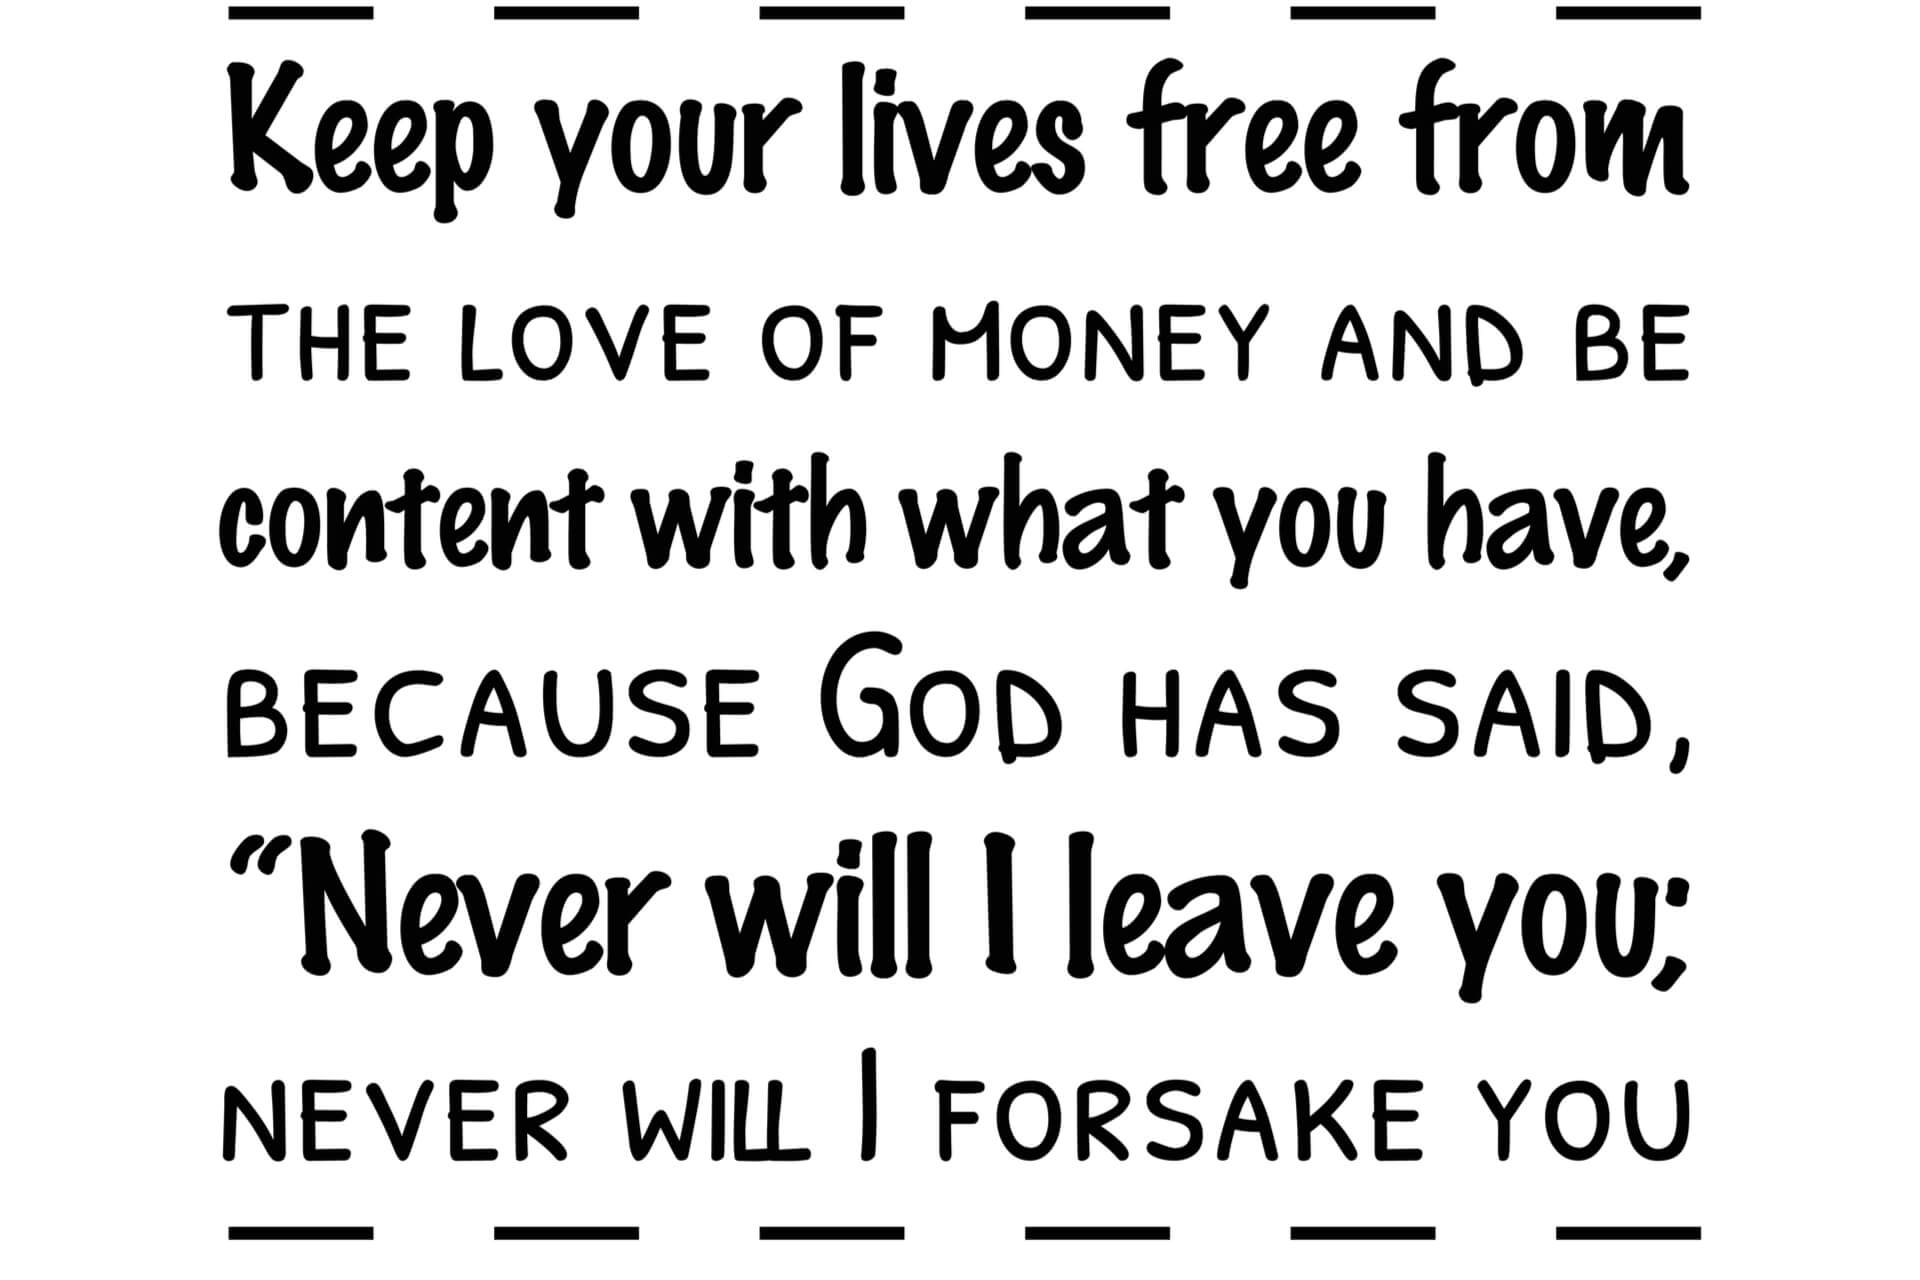 Keep your lives free from the love of money and be content with what you have,